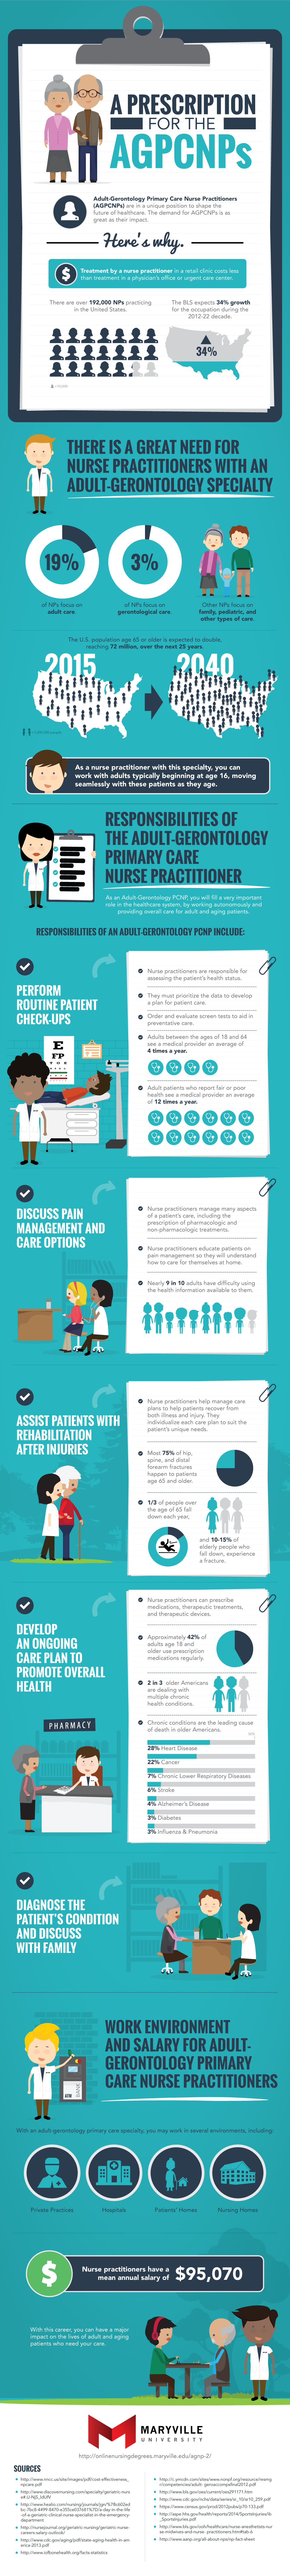 A Day in the Life of a Adult-Gerontology Nurse Practitioner Infographic